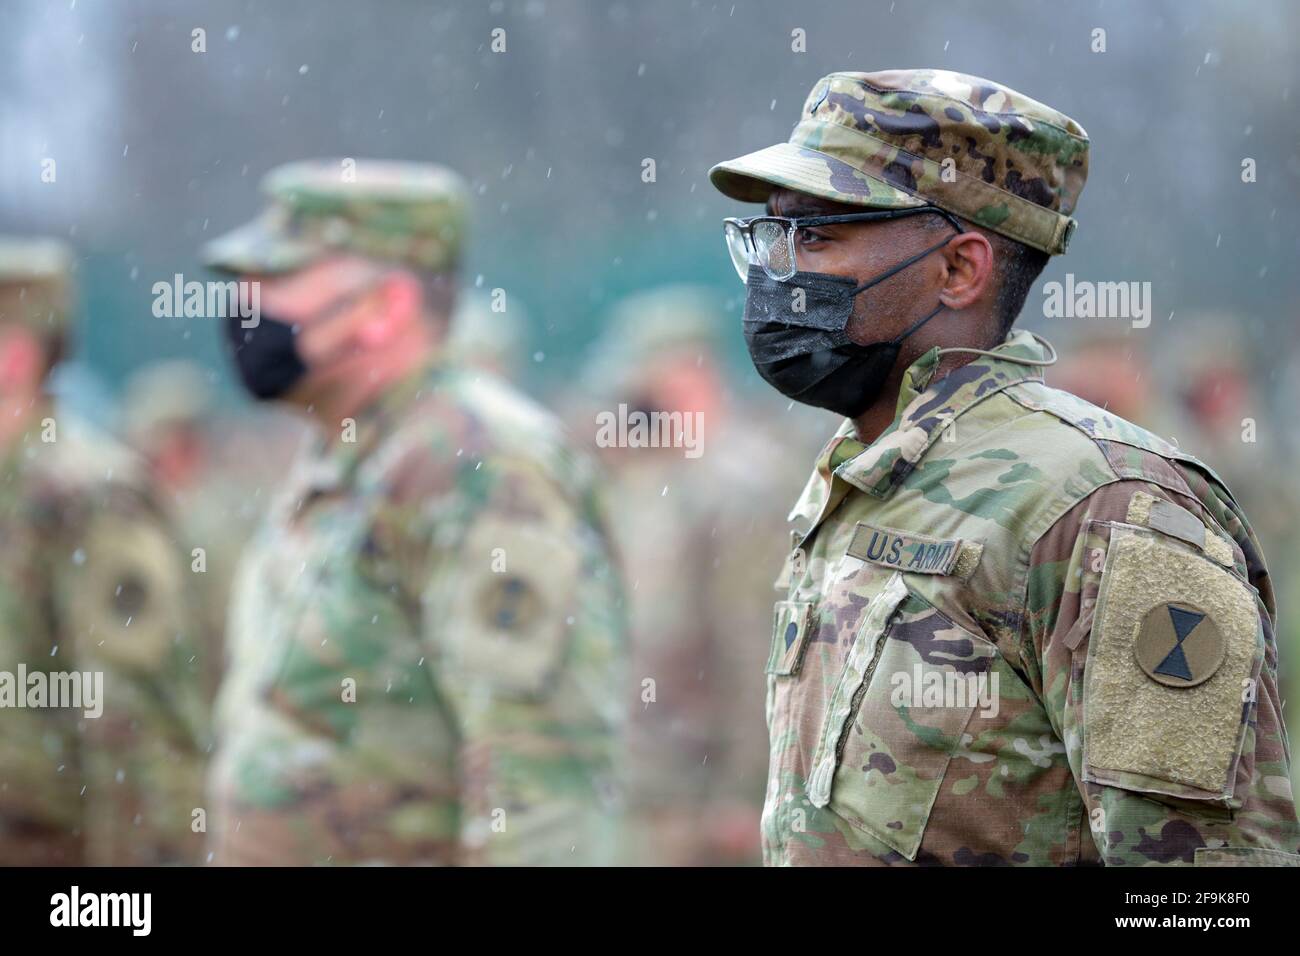 LVIV REGION, UKRAINE - APRIL 16, 2021 - A US Army officer stands to attention during the official rotation ceremony of the Joint Multinational Trainin Stock Photo